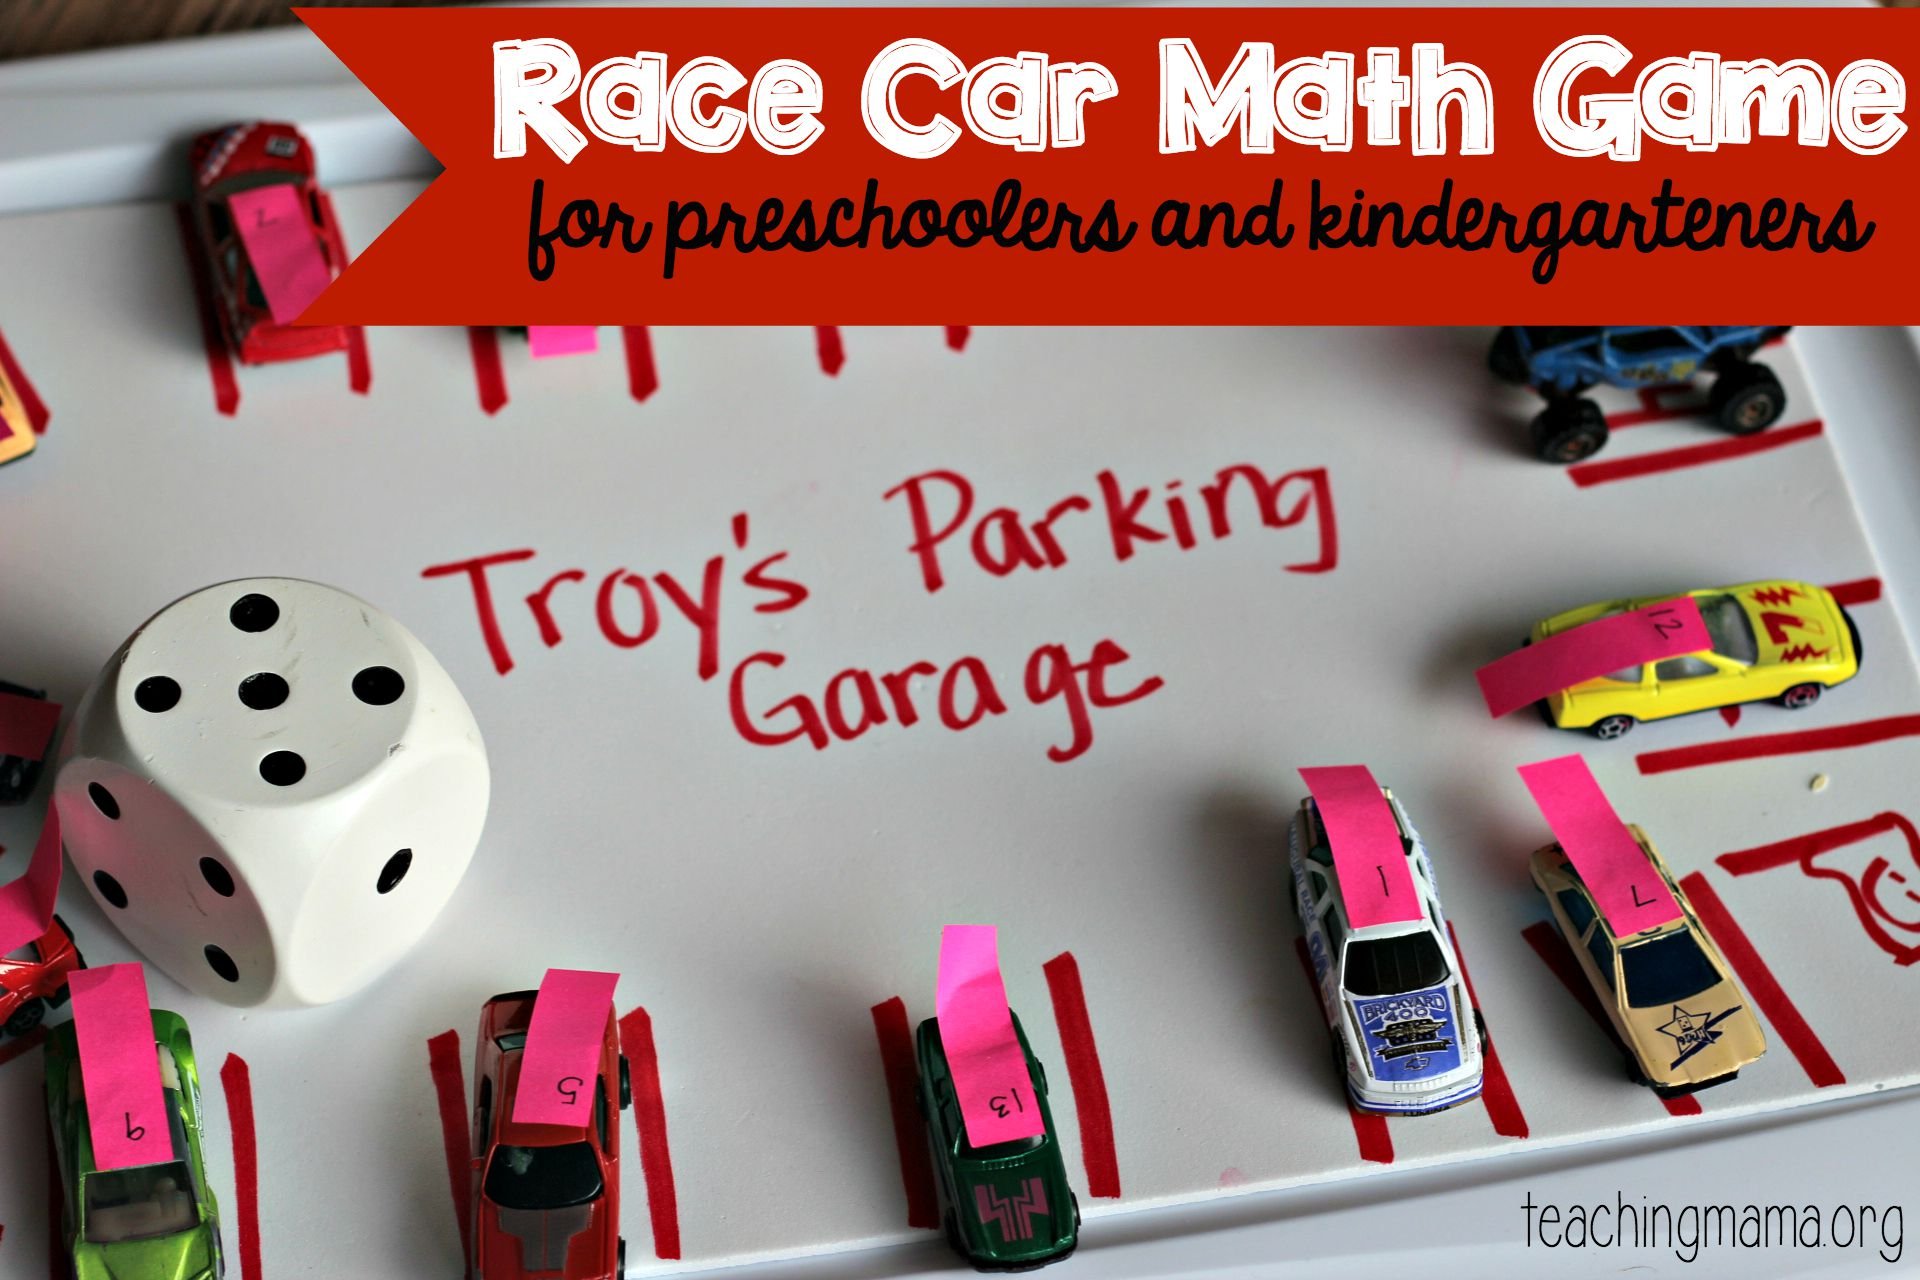 Math Game with Race Cars